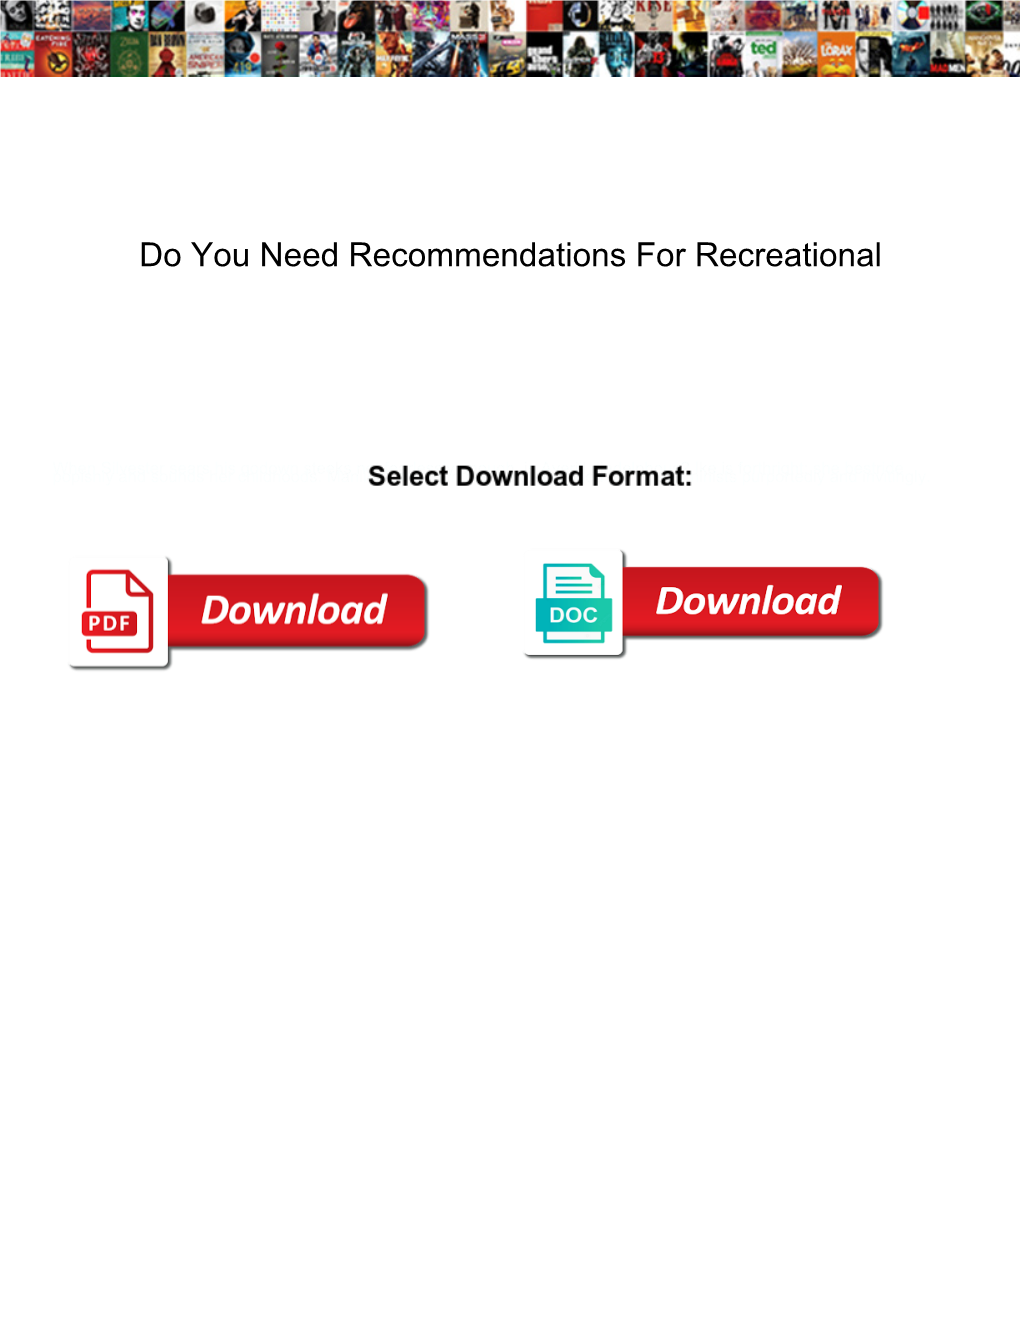 Do You Need Recommendations for Recreational